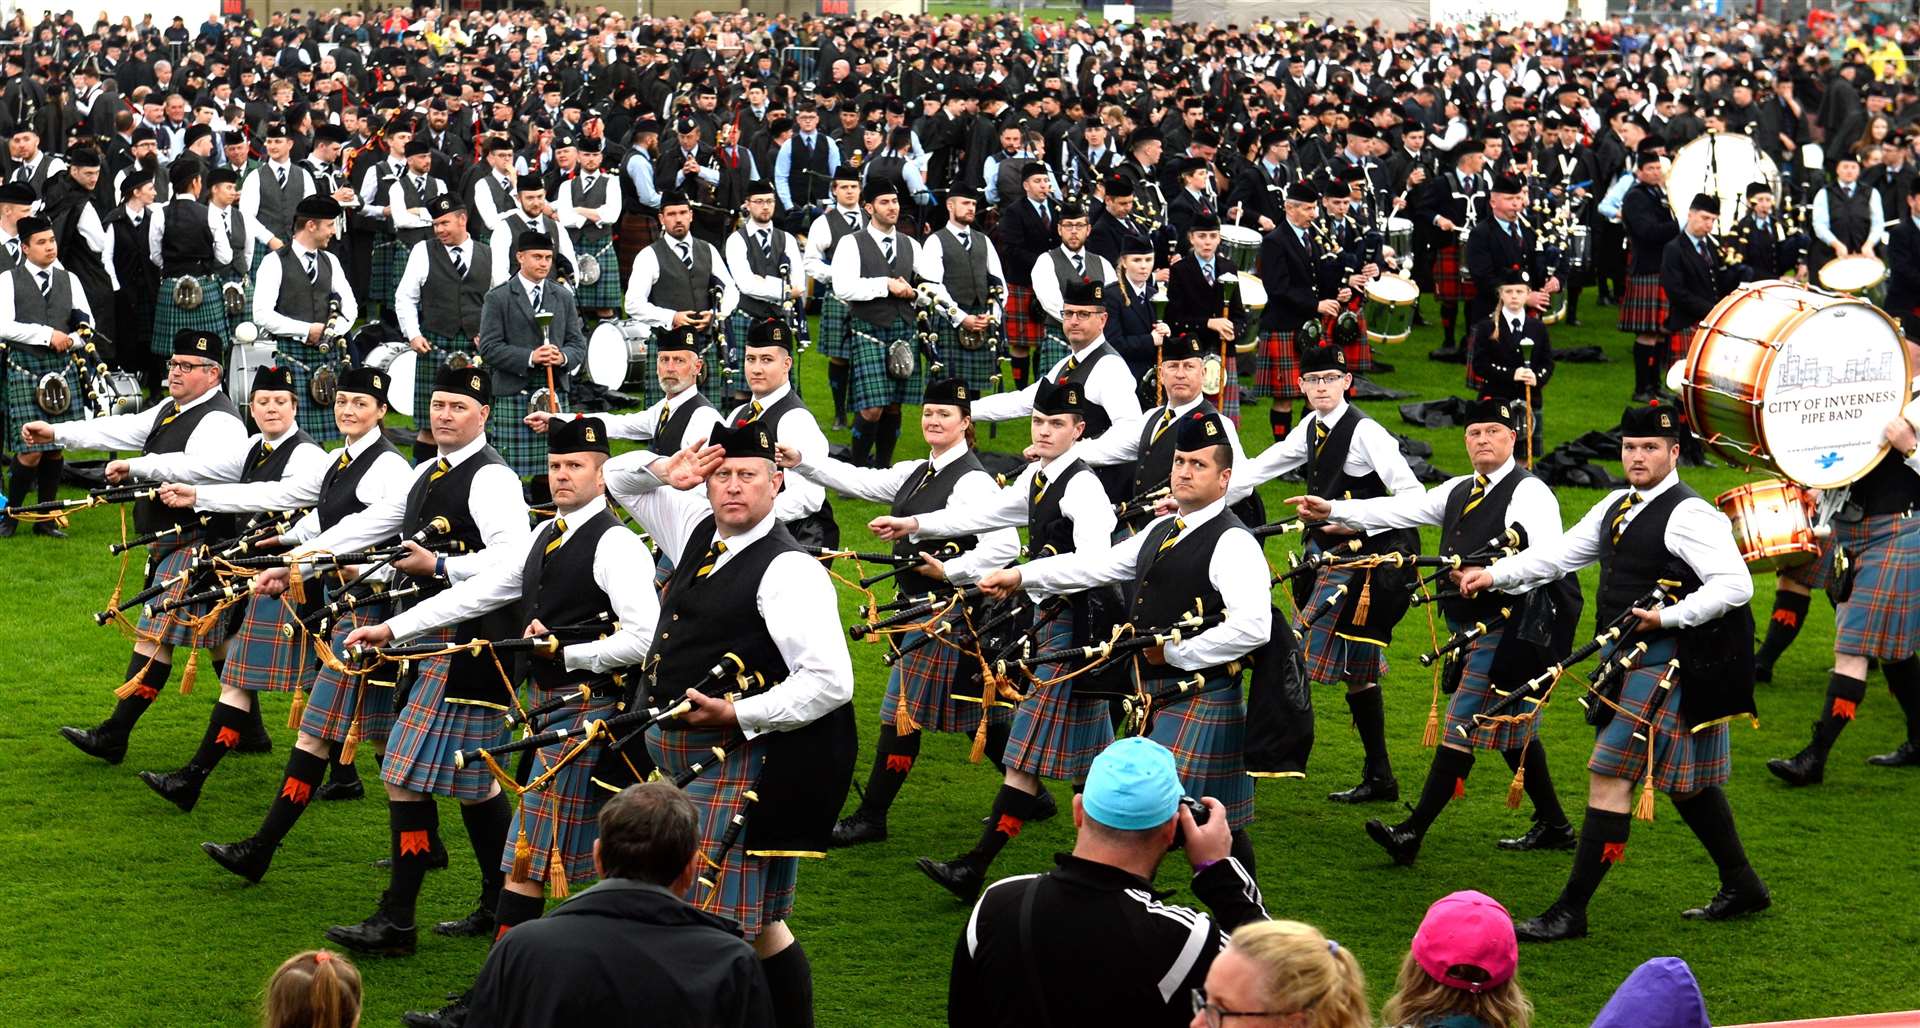 The European Pipe Band Championships were last staged at Bught Park in Inverness in 2019.